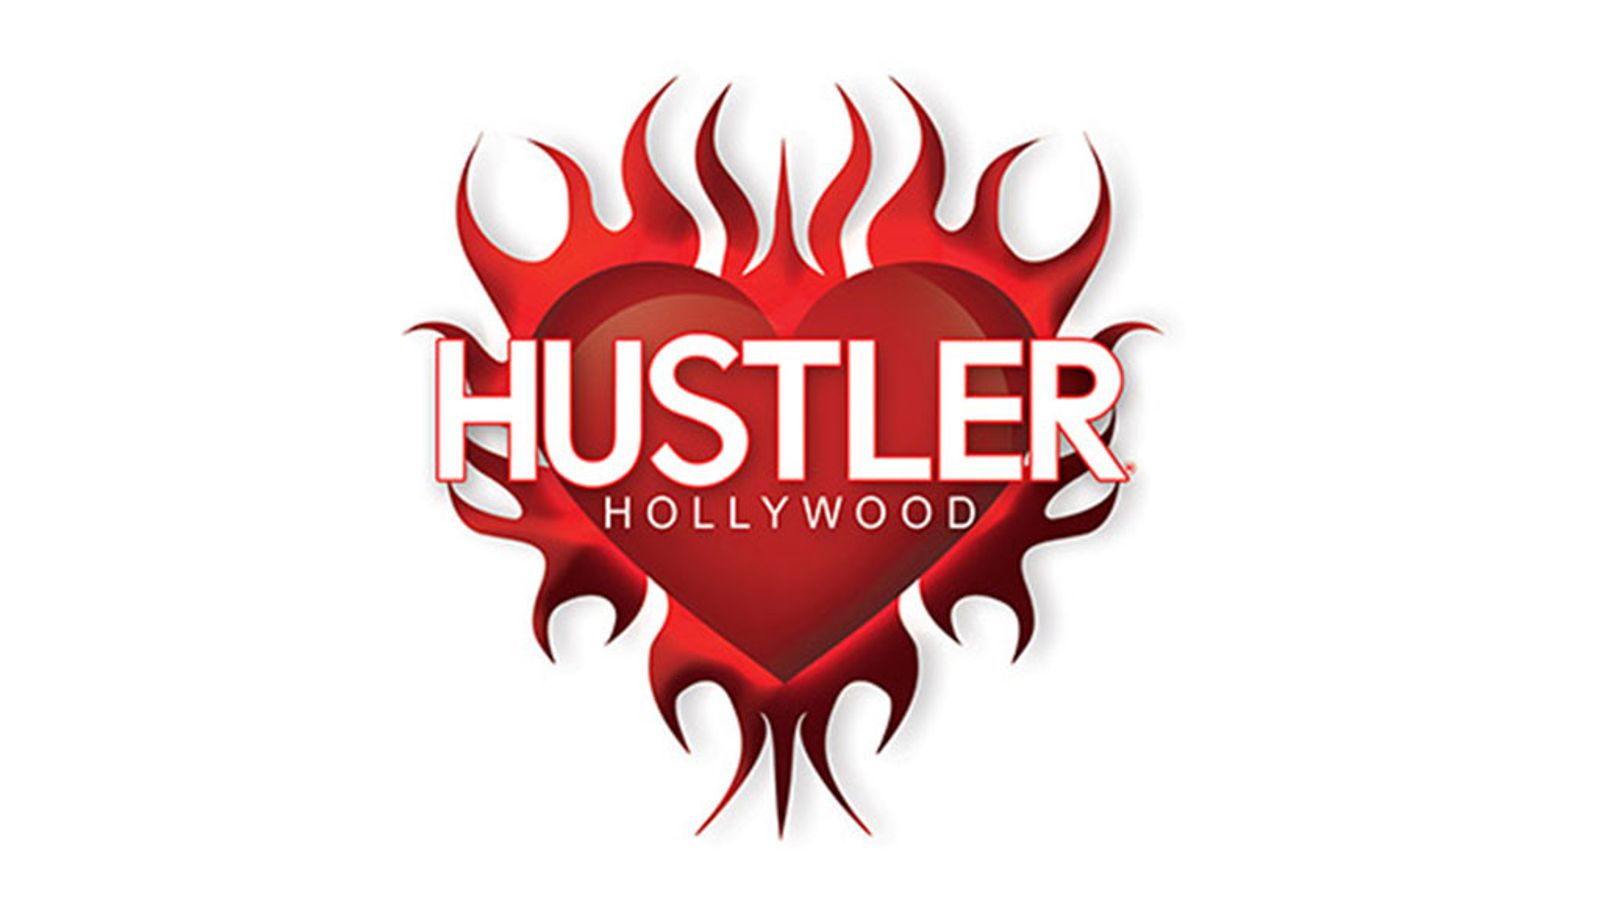 Hustler Hollywood's Fresno Boutique is Open for Business